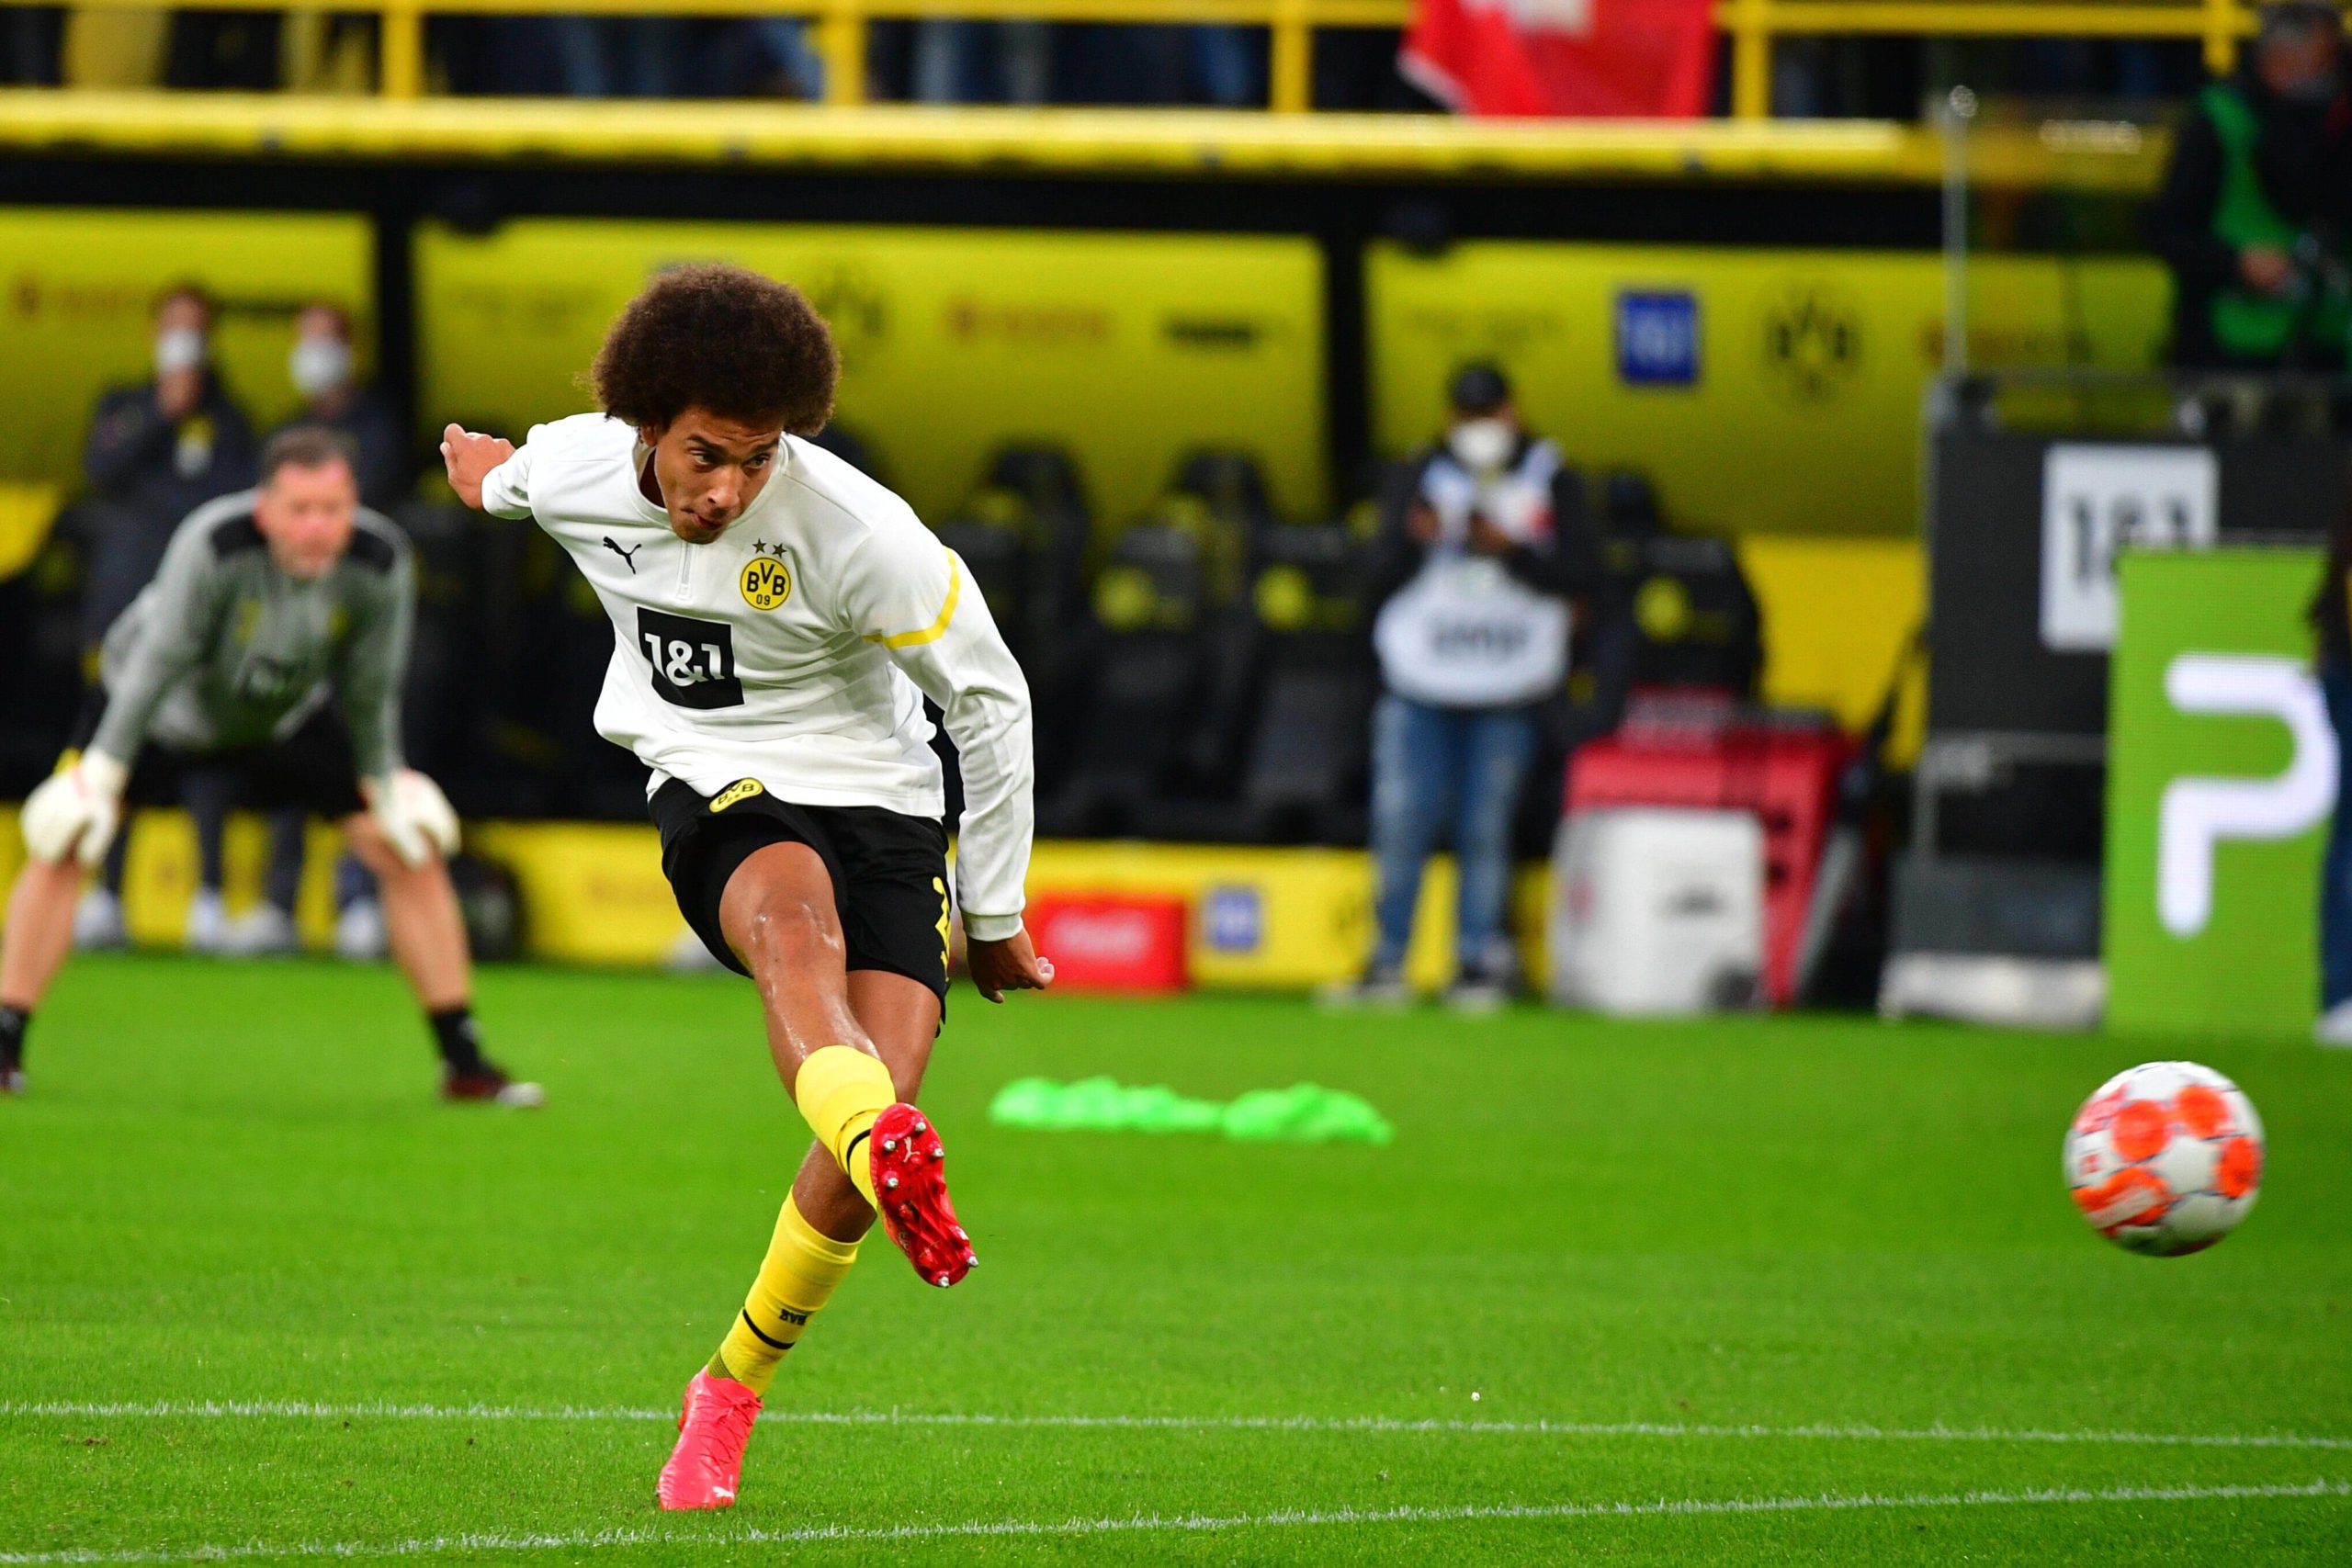 Journalist reckons Aston Villa fans would have loved Witsel who is seen in the picture